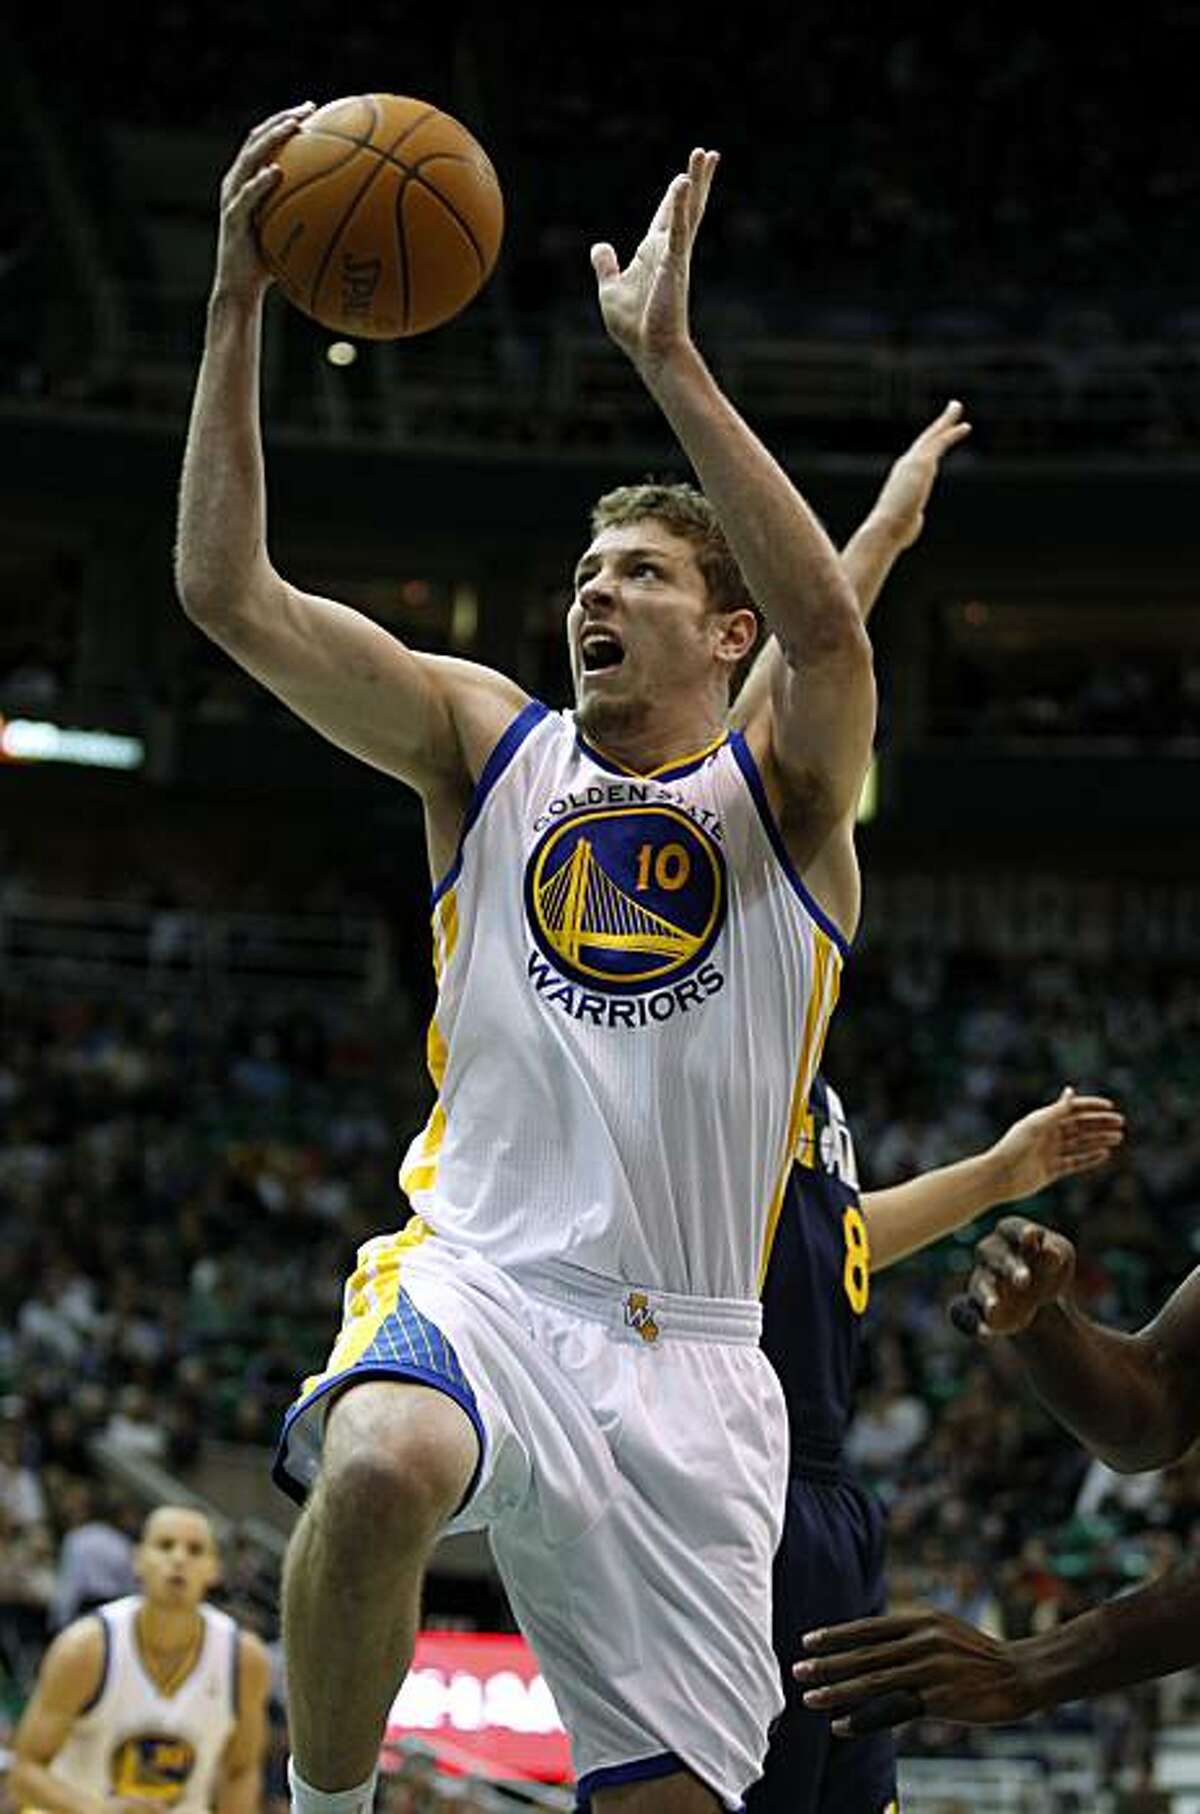 Golden State Warriors center David Lee (10) slips by Utah Jazz guard Deron Williams (8) for a basket during the first half of an NBA basketball game in Salt Lake City, Wednesday, Feb. 16, 2011.